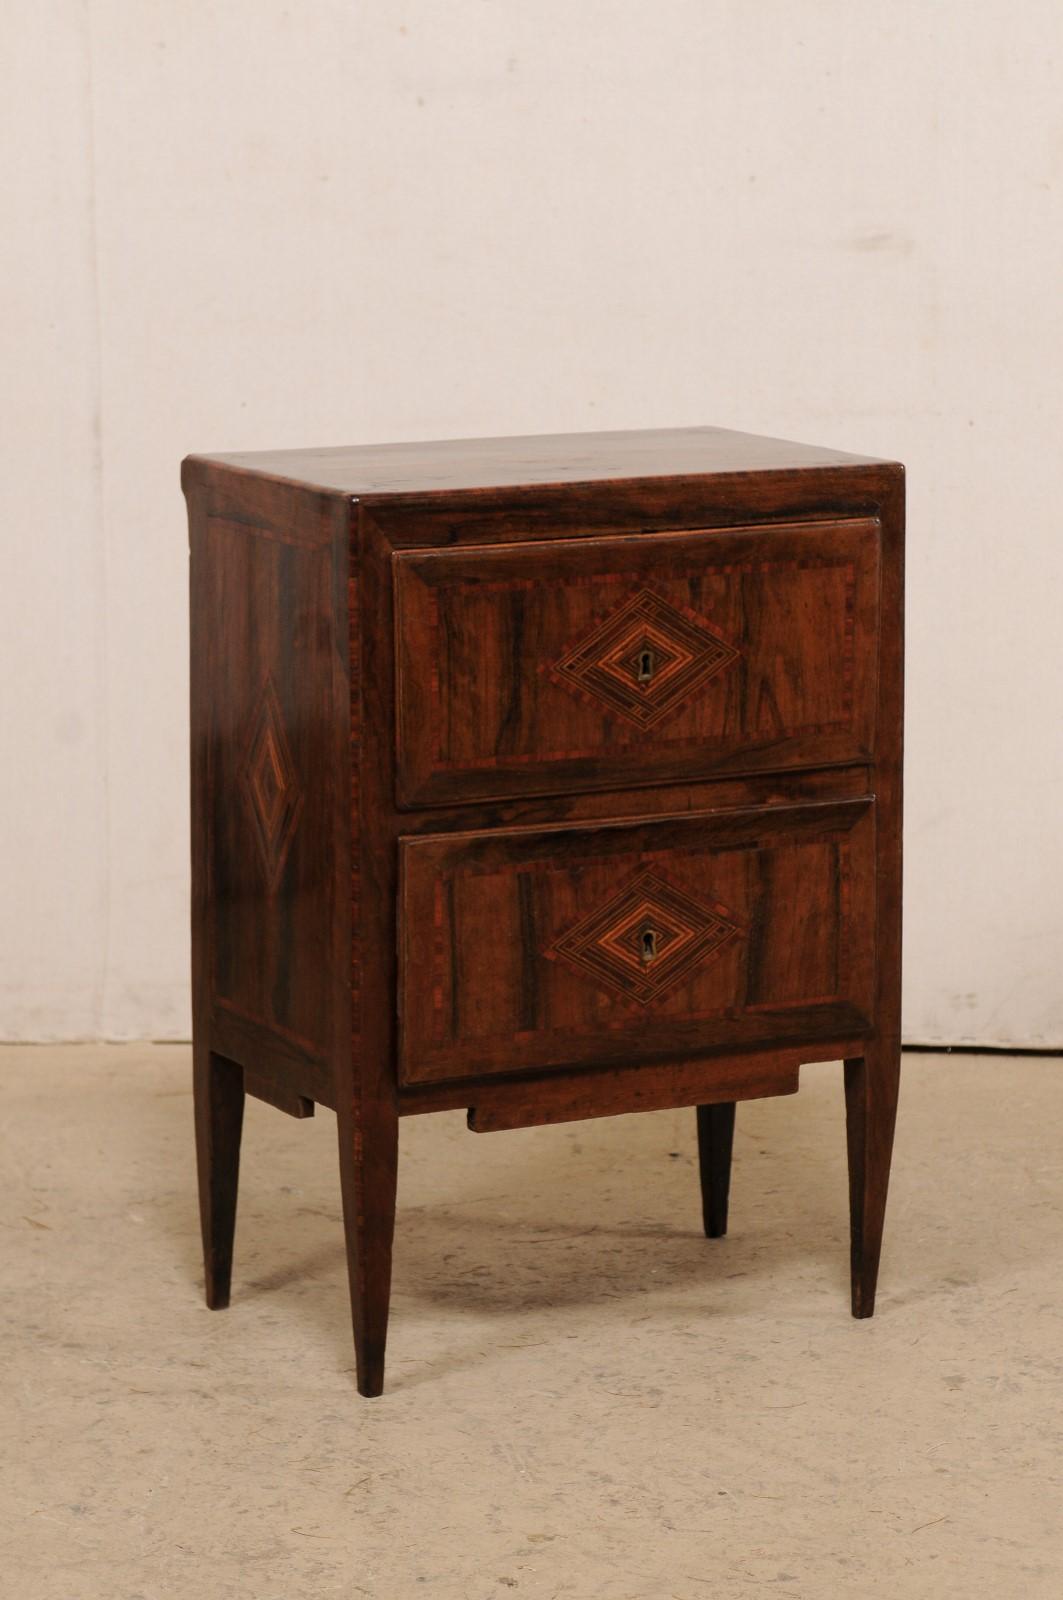 An Italian two-drawer raised side chest, with nice decorative inlay, from the 18th century. This antique side chest or end-table from Italy is adorn with beautiful inlay patterning throughout, and features stylized diamond motif at it's top, side,